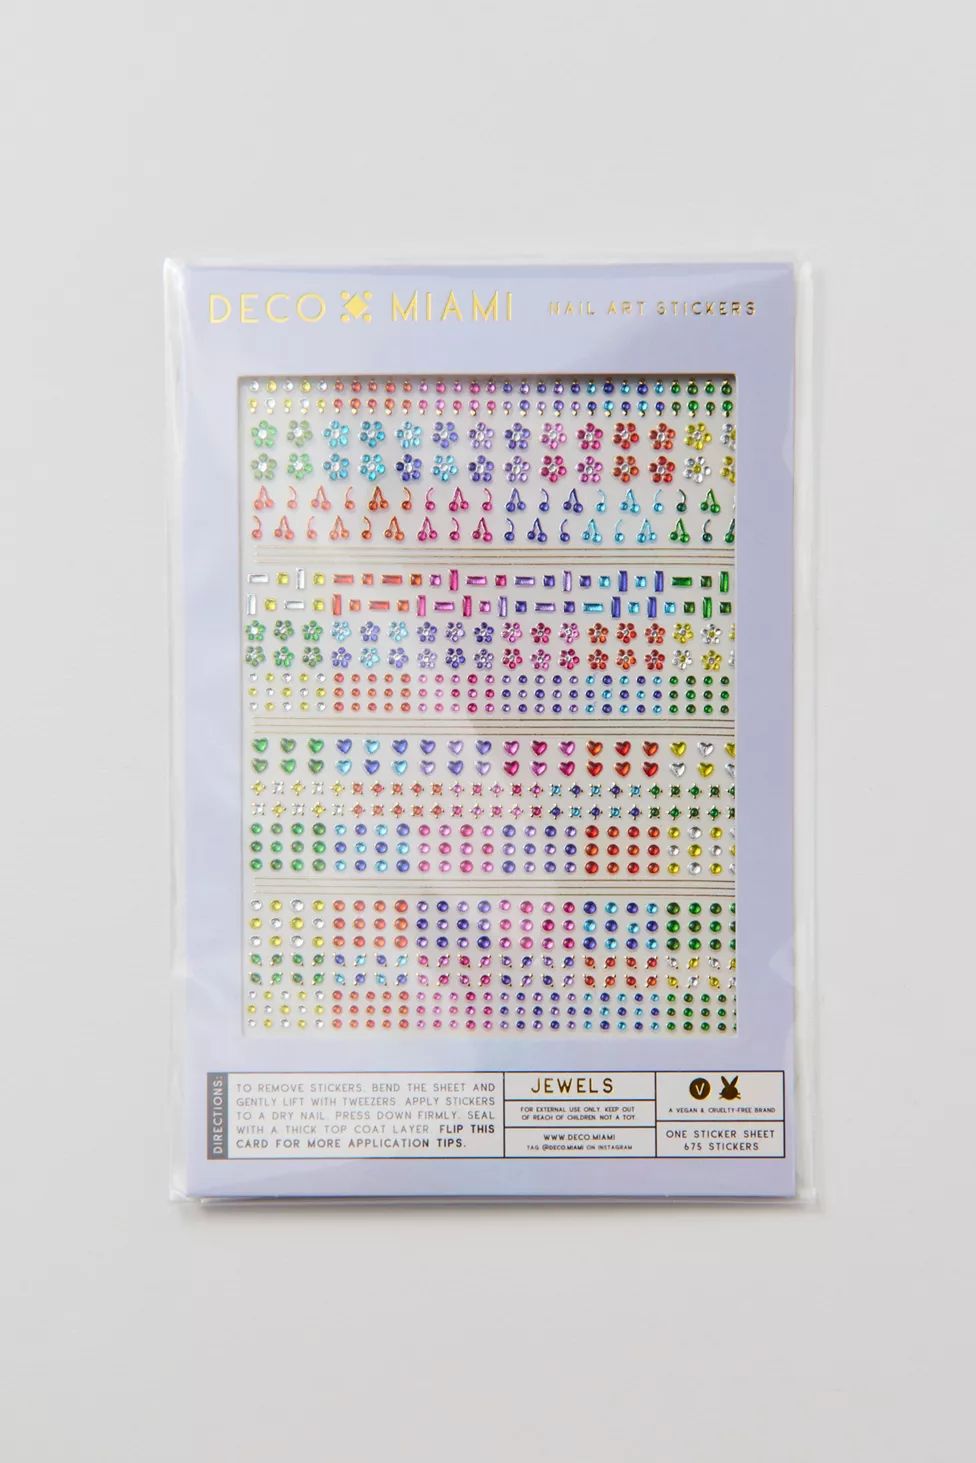 Deco Miami Nail Art Sticker Sheet | Urban Outfitters (US and RoW)